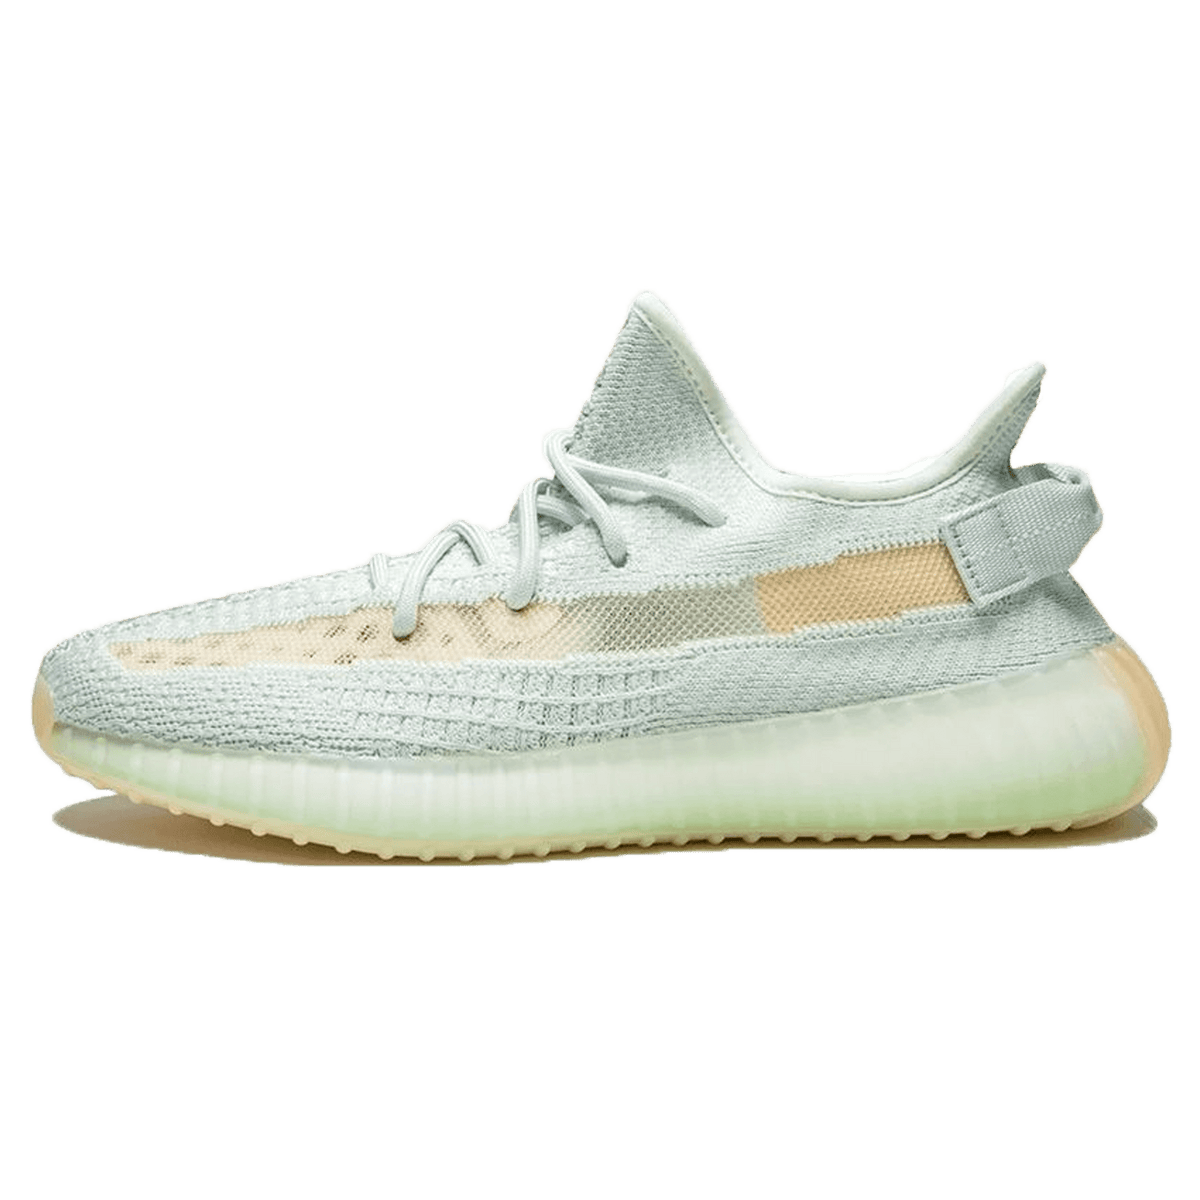 adidas Yeezy Boost 350 V2 'Hyperspace' - CerbeShops